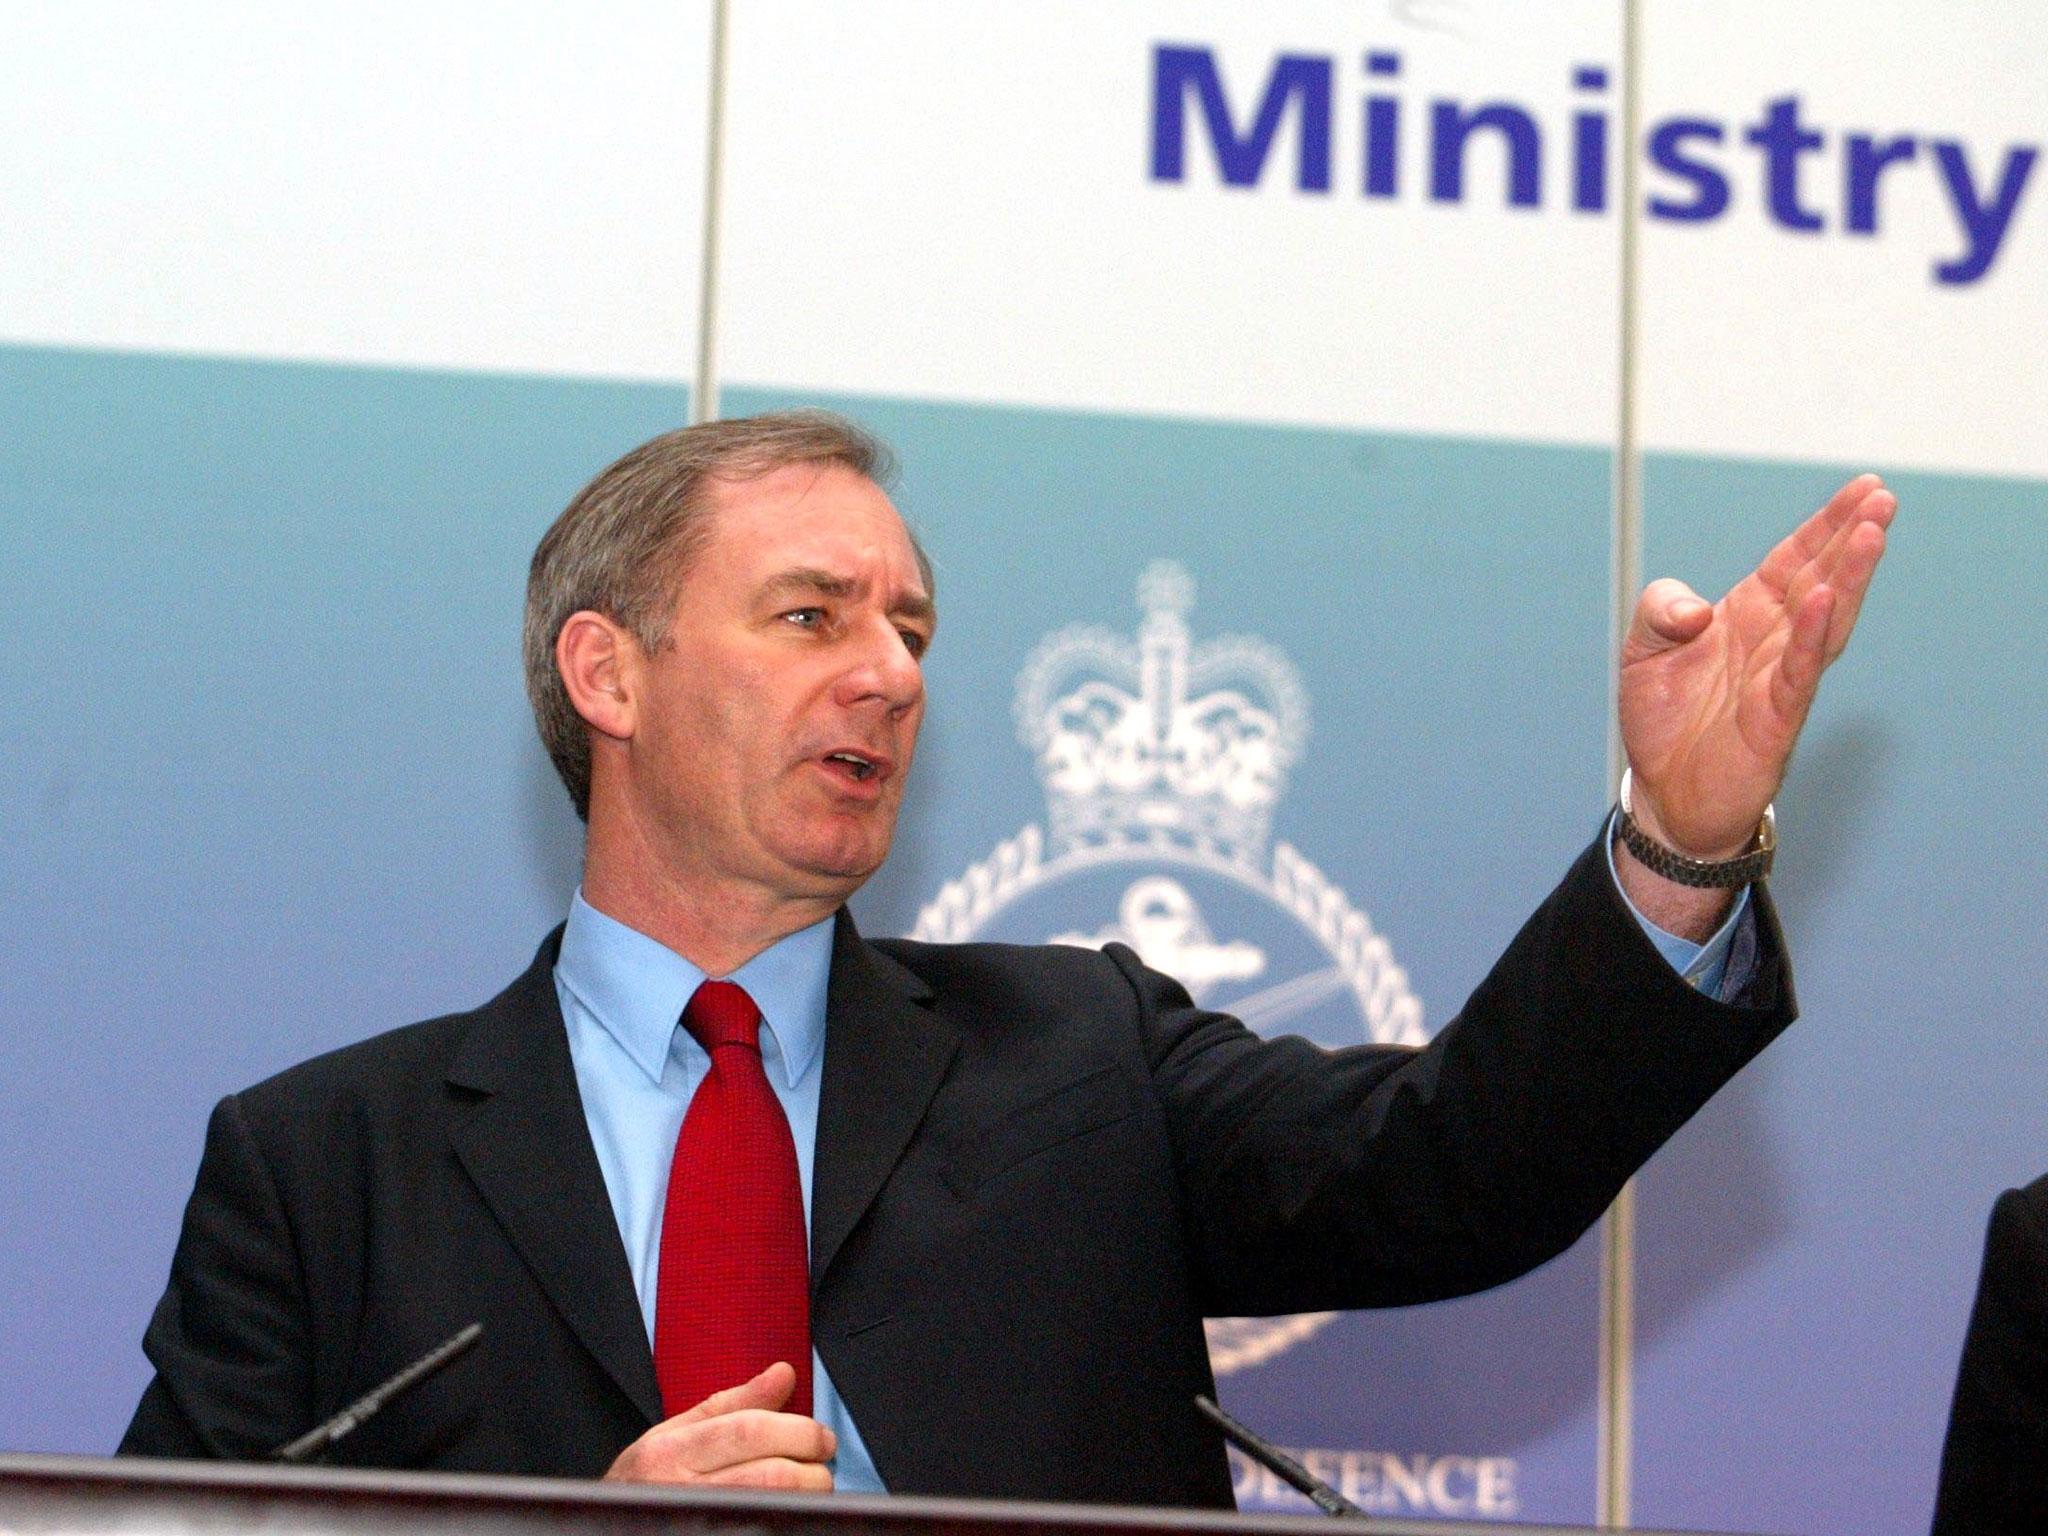 March 2003: Geoff Hoon gives a Ministry of Defence press briefing